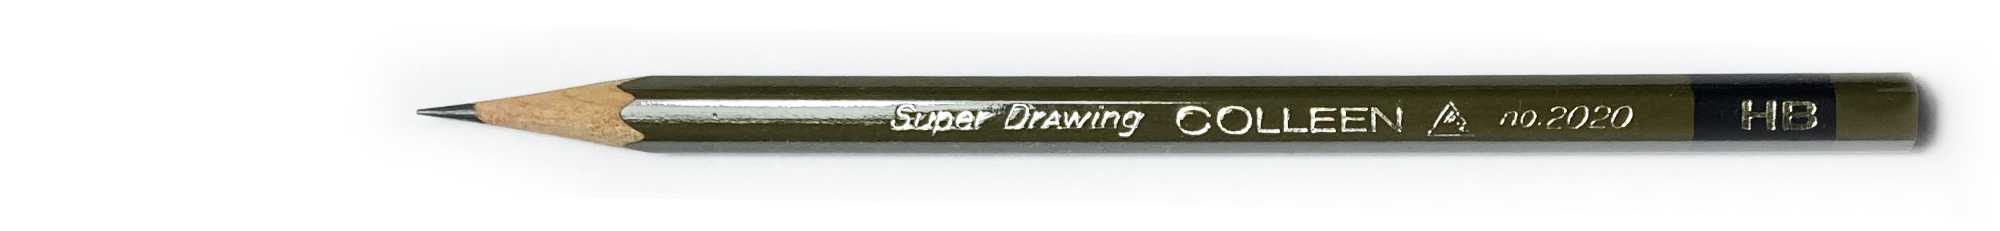 Colleen 2020 Pencil